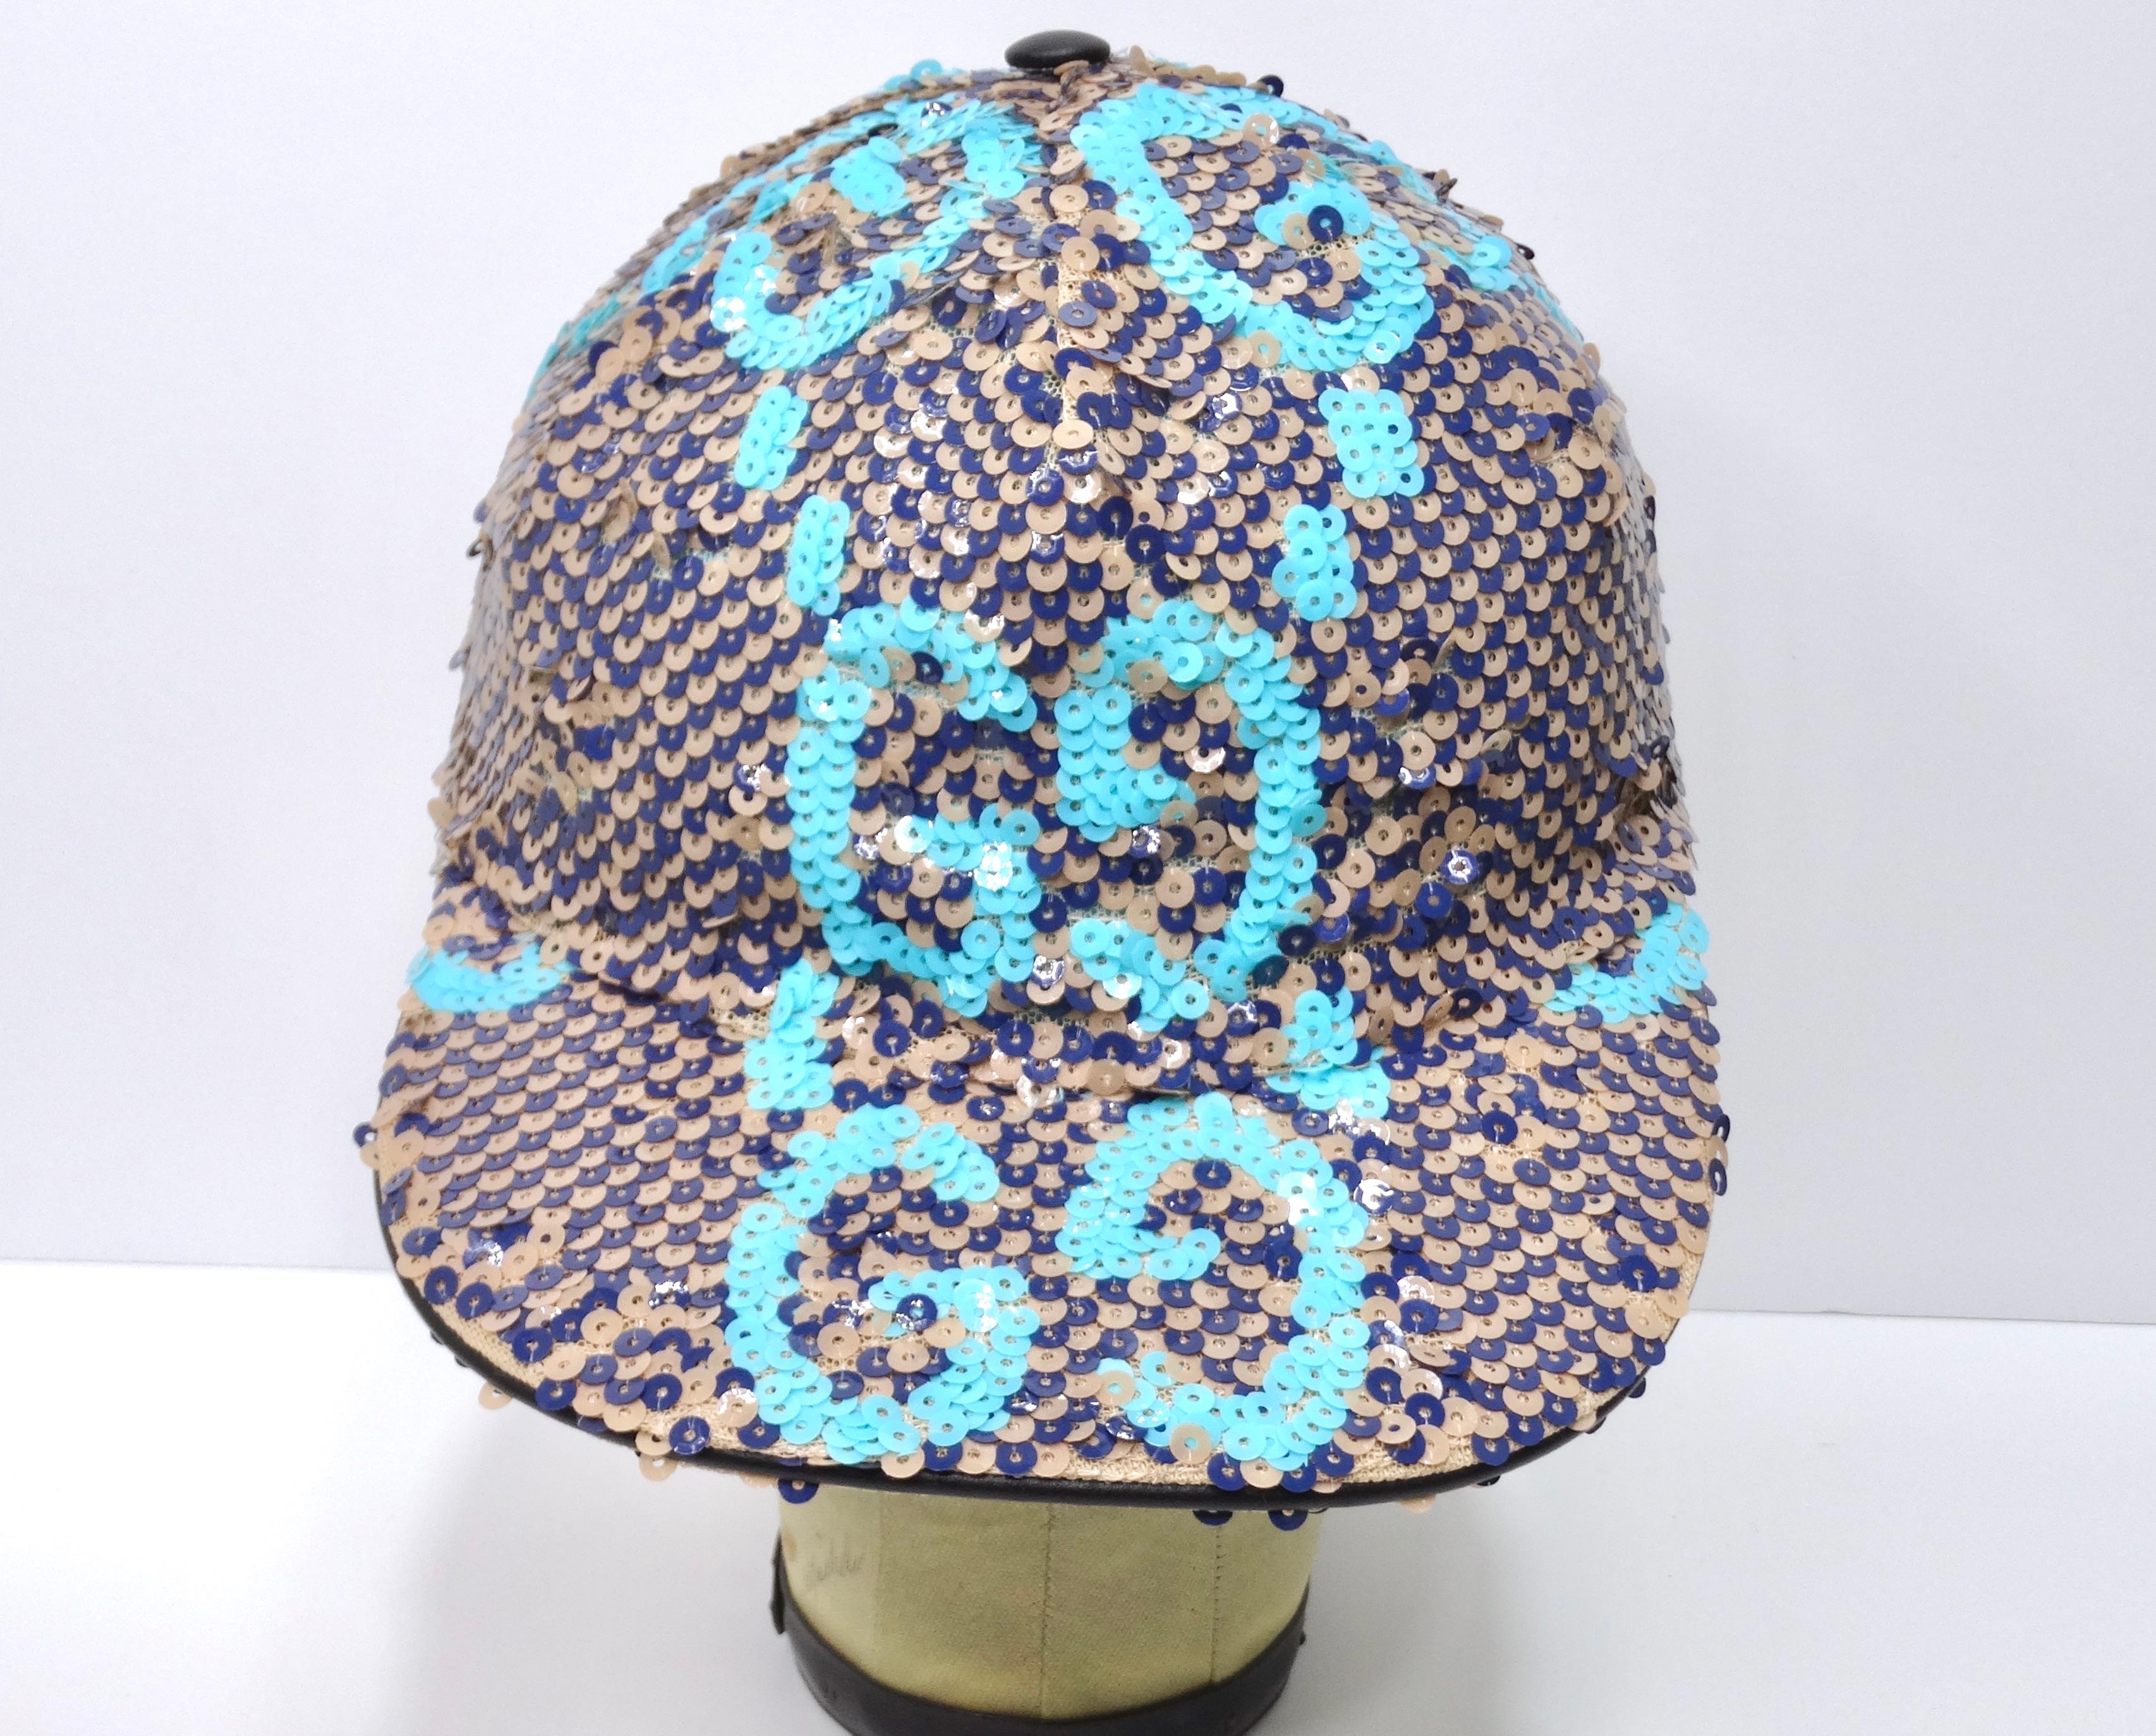 A baseball cap for a fashionista! There's no way you won't stand out in a crowd in this fully sequinned baseball hat. This hat was featured in the 2019 Gucci Fall/Winter Runway Show. This is a hard hat to get your hands on as it was limited edition